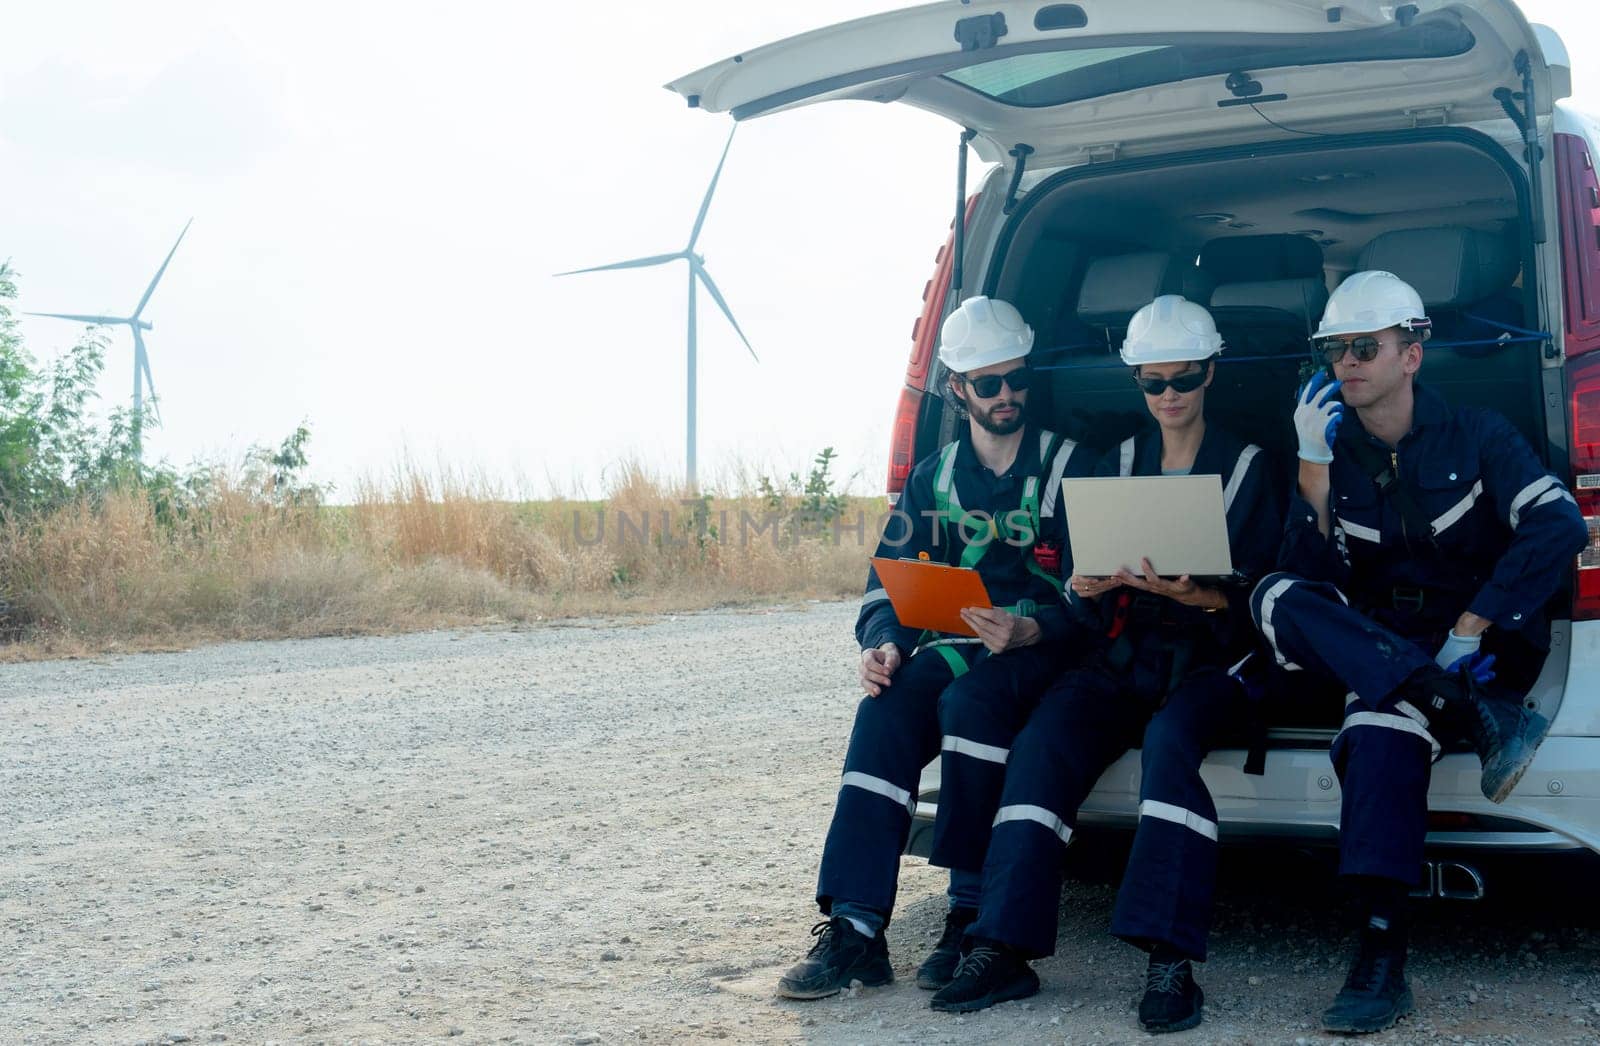 Group of technician workers sit on back of van on the road and discuss about work using laptop with windmill or wind turbine on the background.